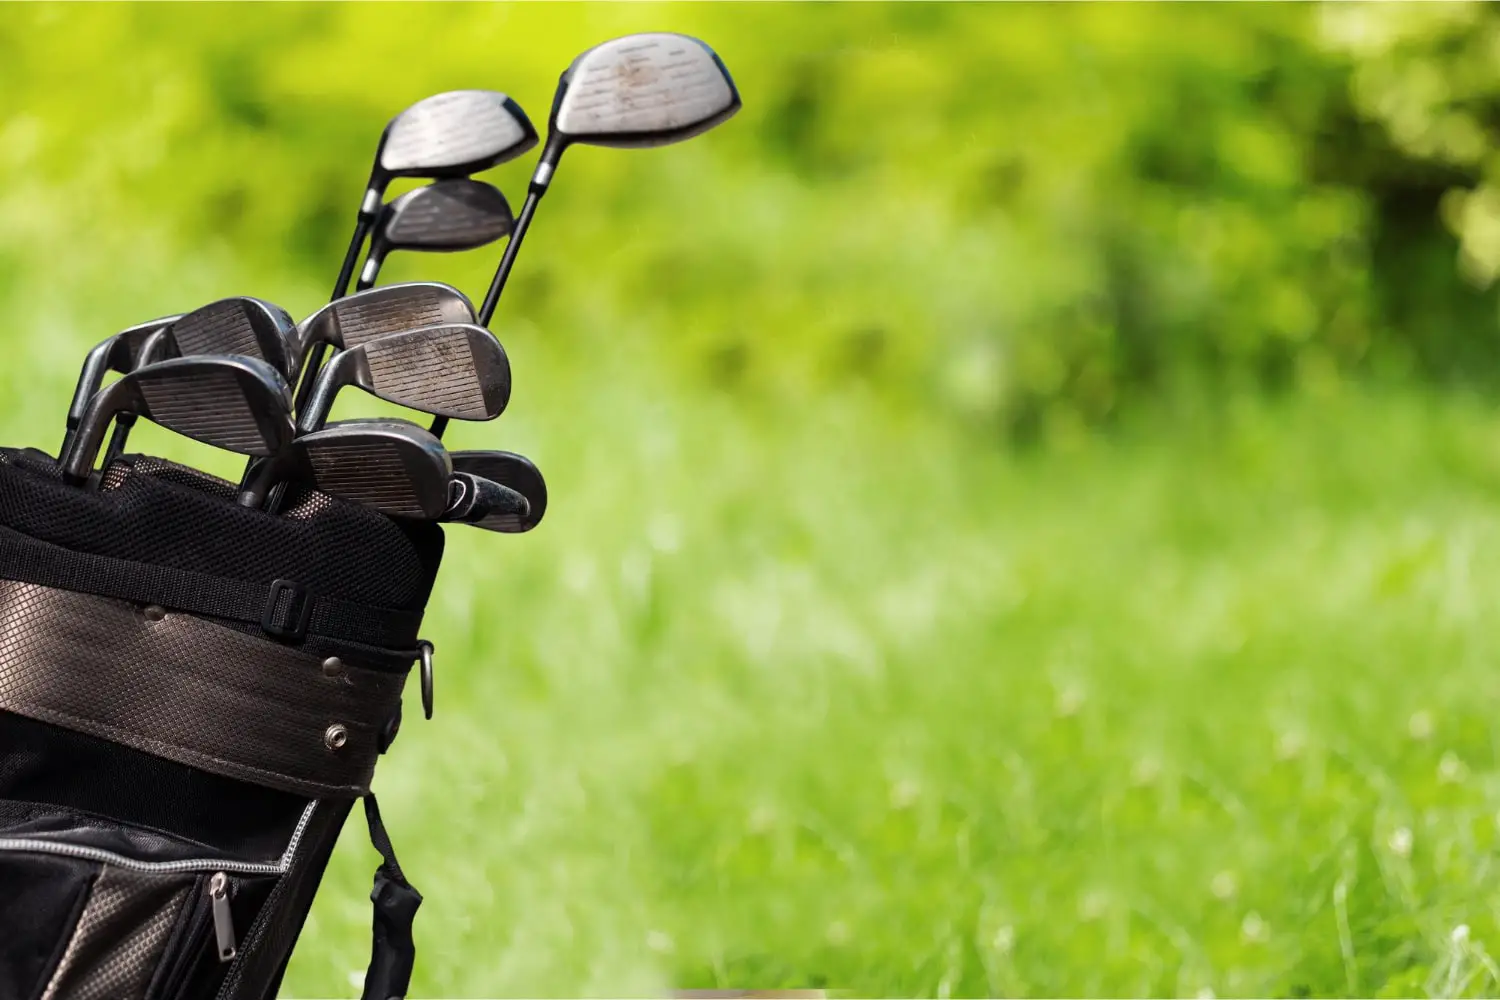 How To Build Your Own Golf Clubs: A DIY Guide - Champ Golf